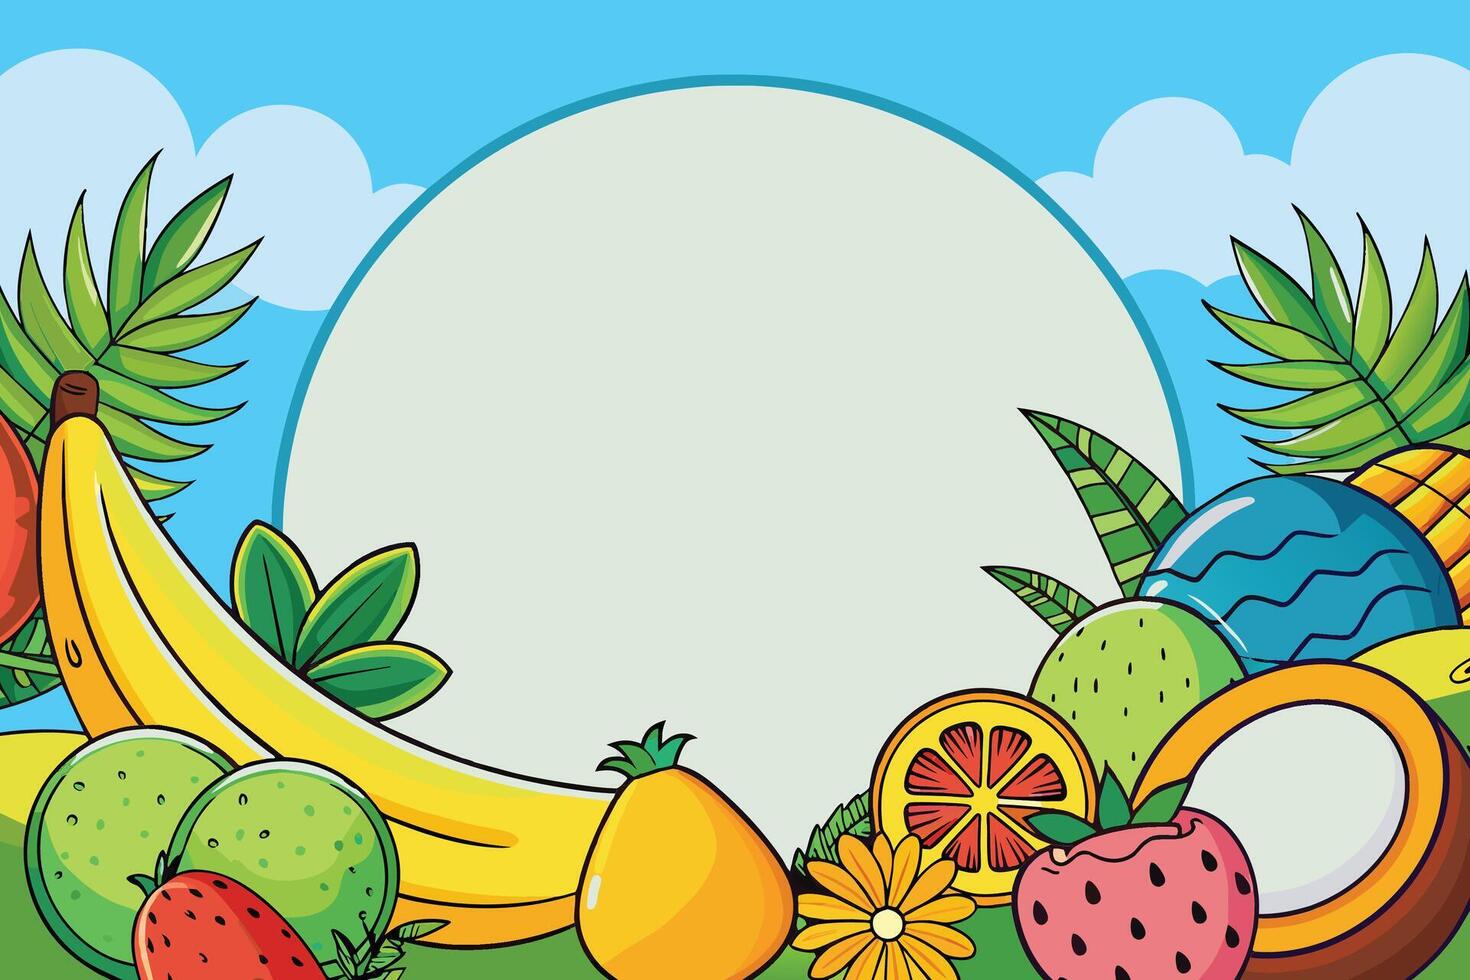 Banana and fruits design, Fruit healthy organic food sweet and nature theme Vector illustration